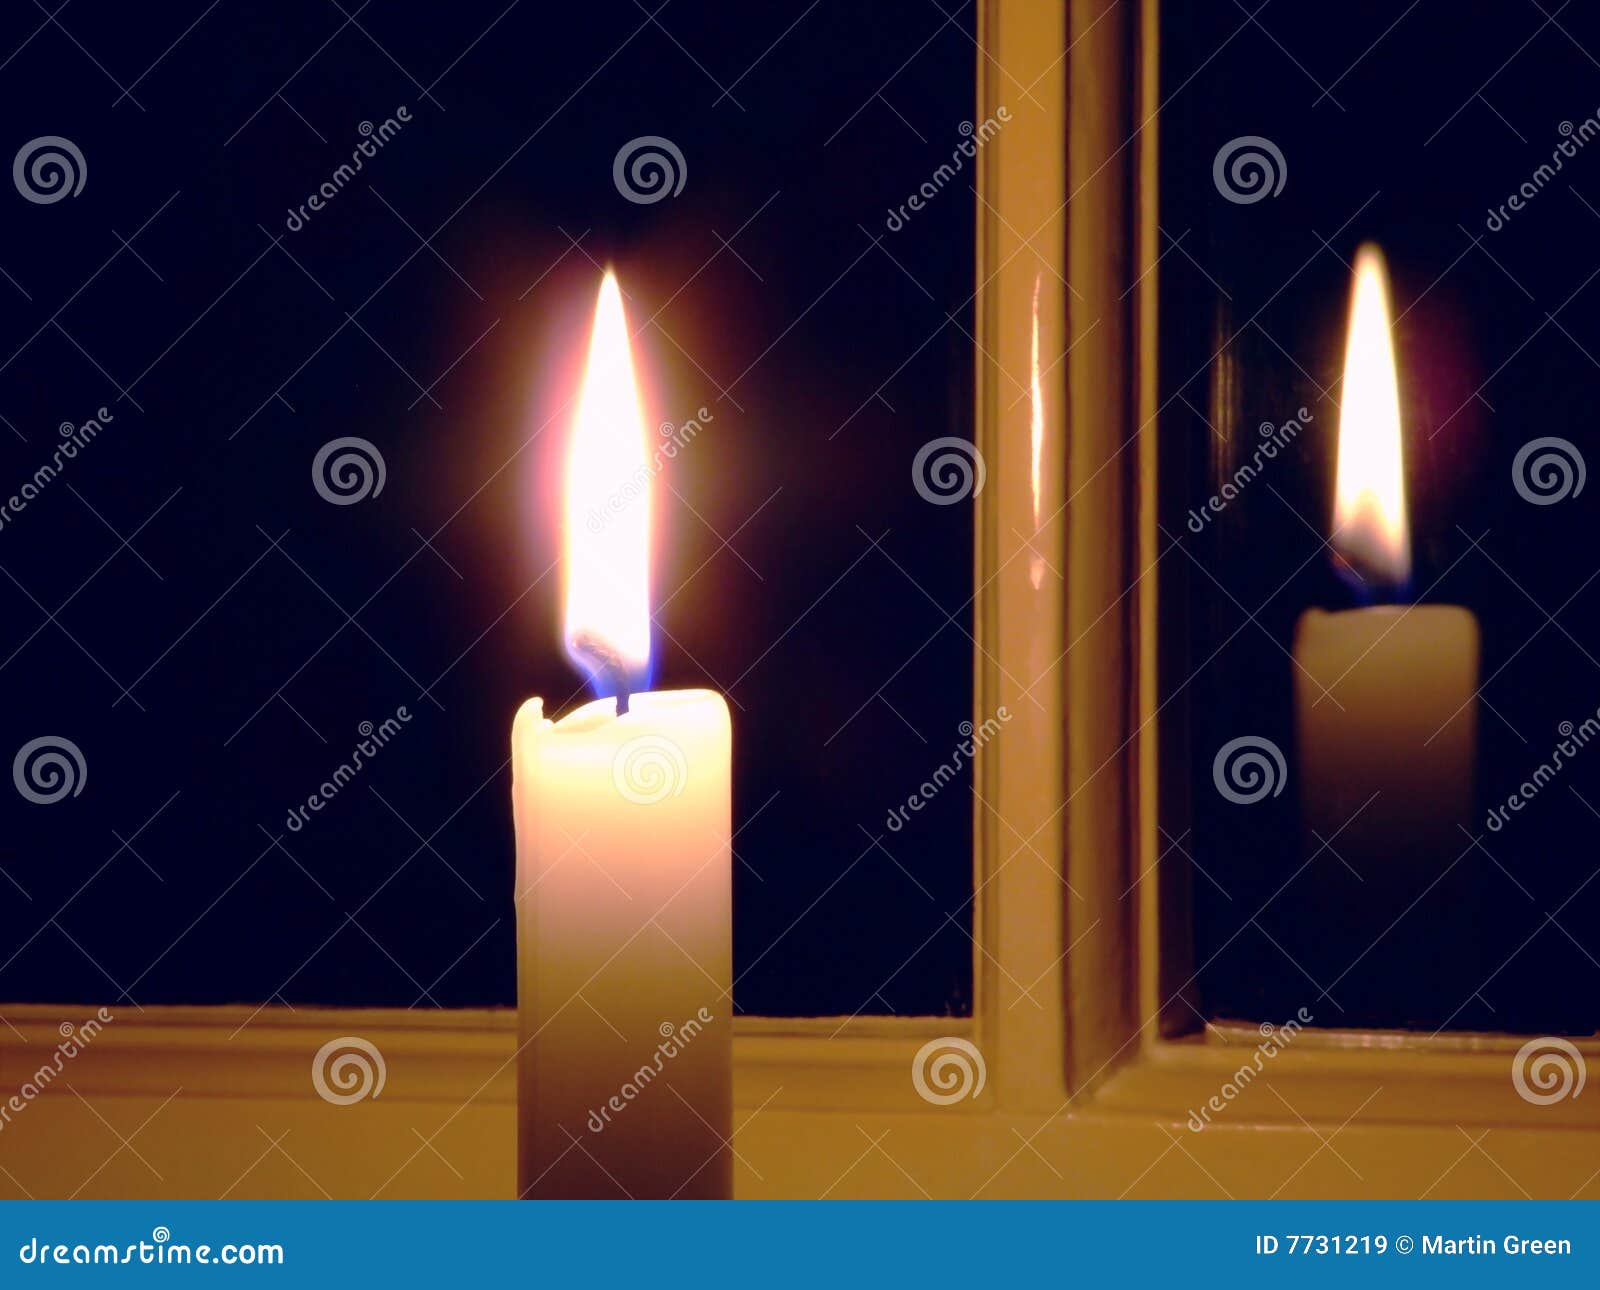 candle by the window